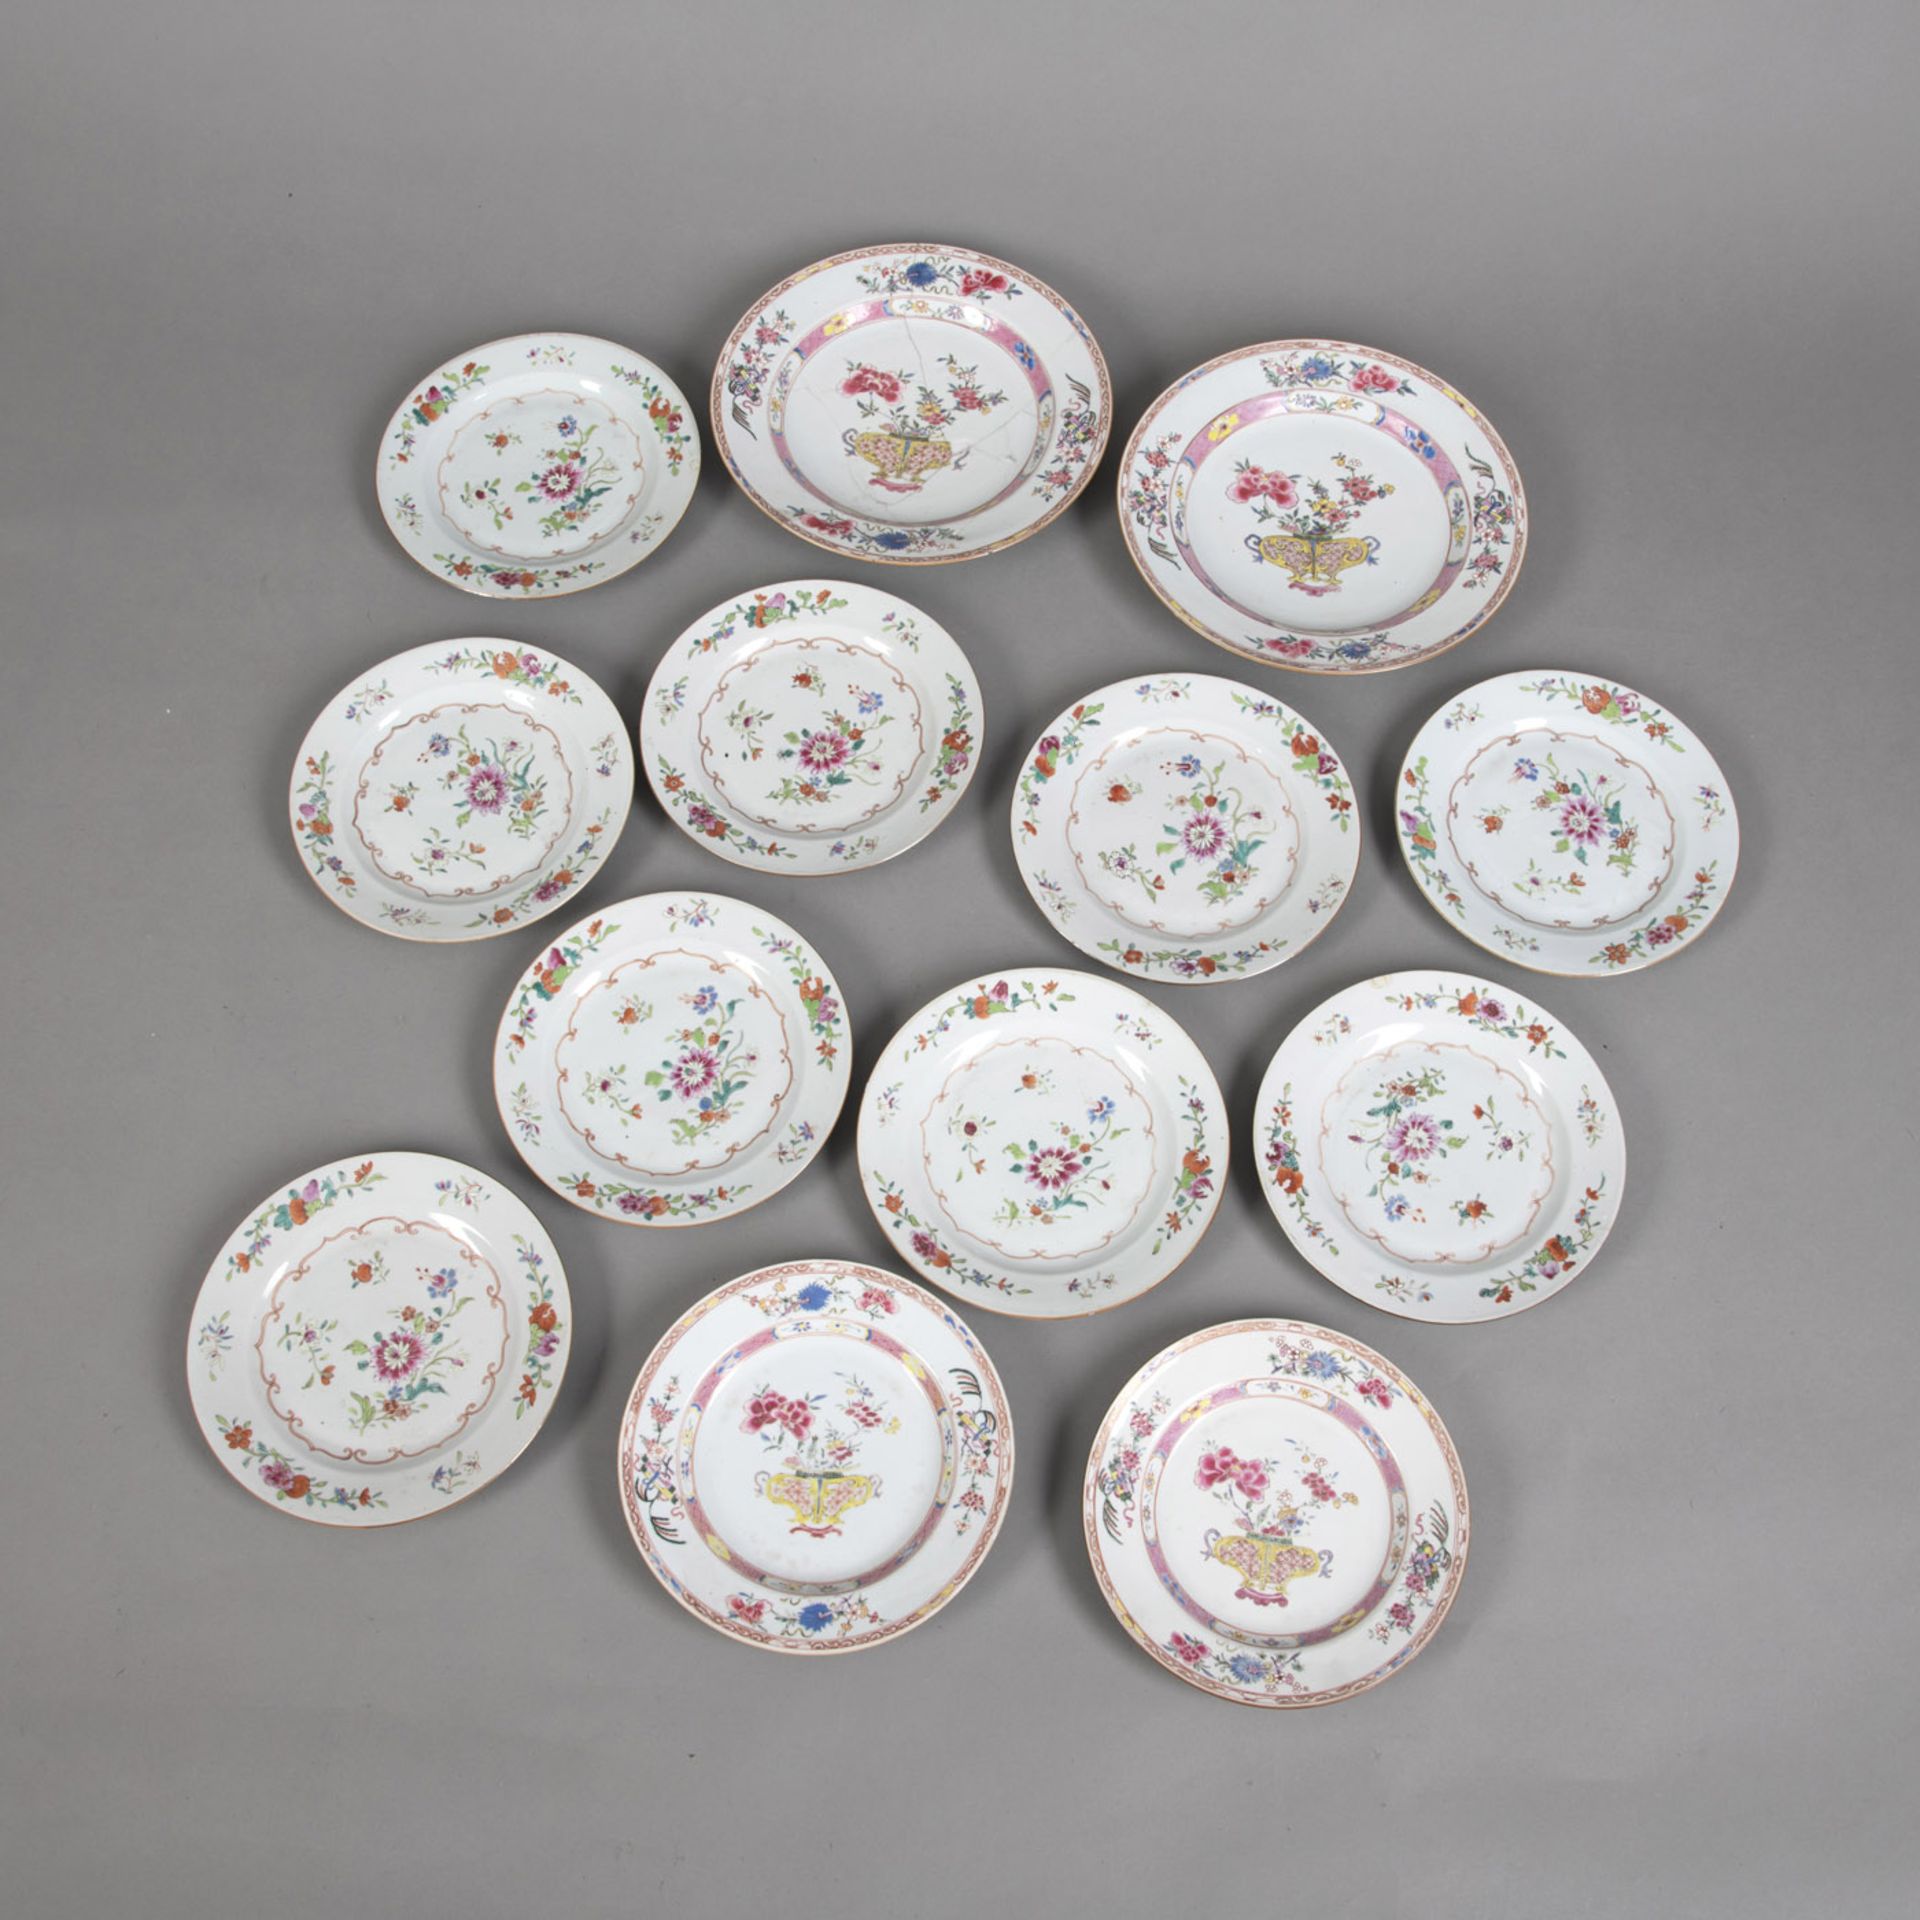 TWO LARGE AND ELEVEN SMALLER 'FAMILLE ROSE' EXPORT PORCELAIN DISHES